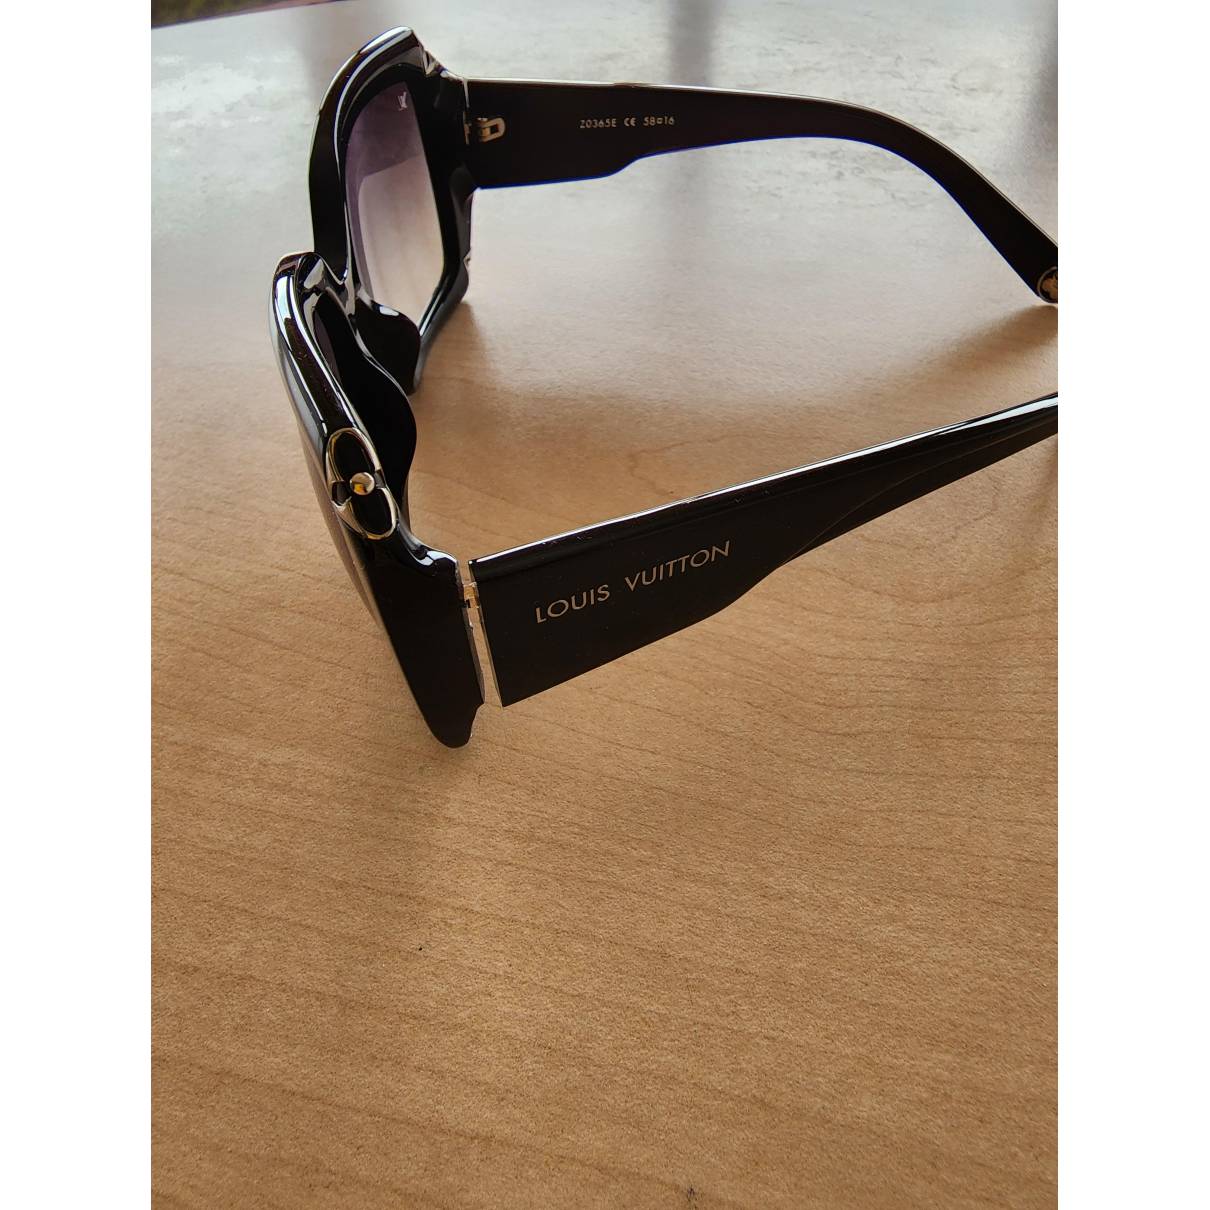 Sunglasses Louis Vuitton Black in Other - 28393384